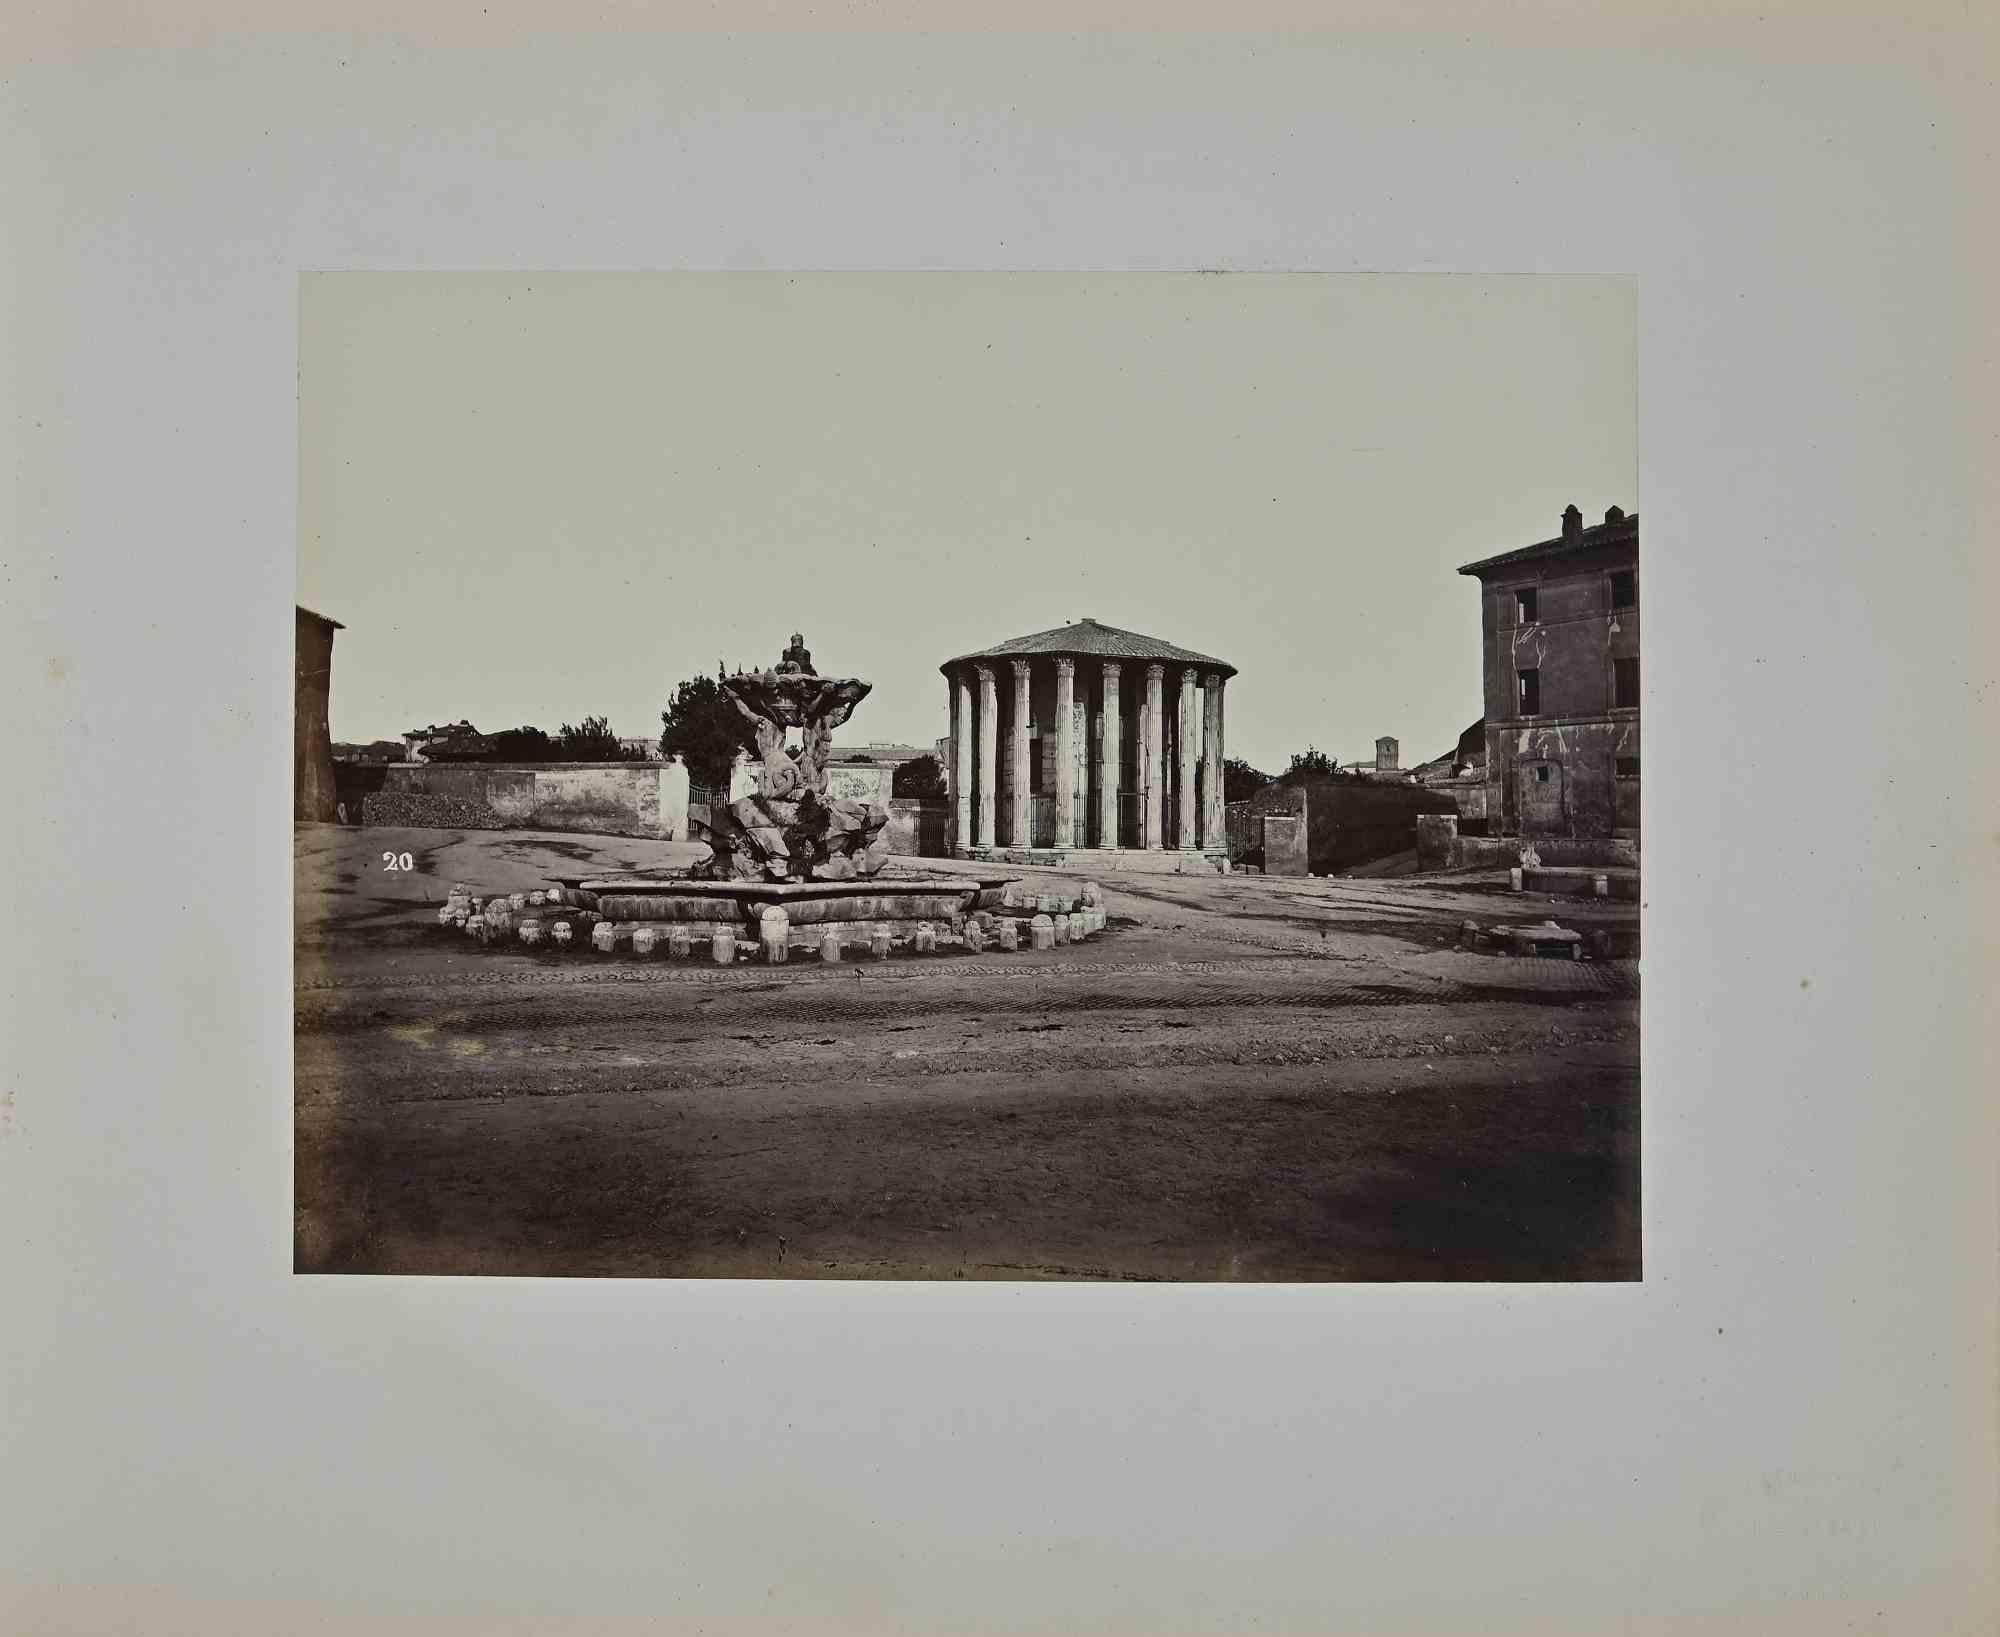 Francesco Sidoli Black and White Photograph - View of Temple of Vesta - Photograph by F. Sidoli - 19th Century